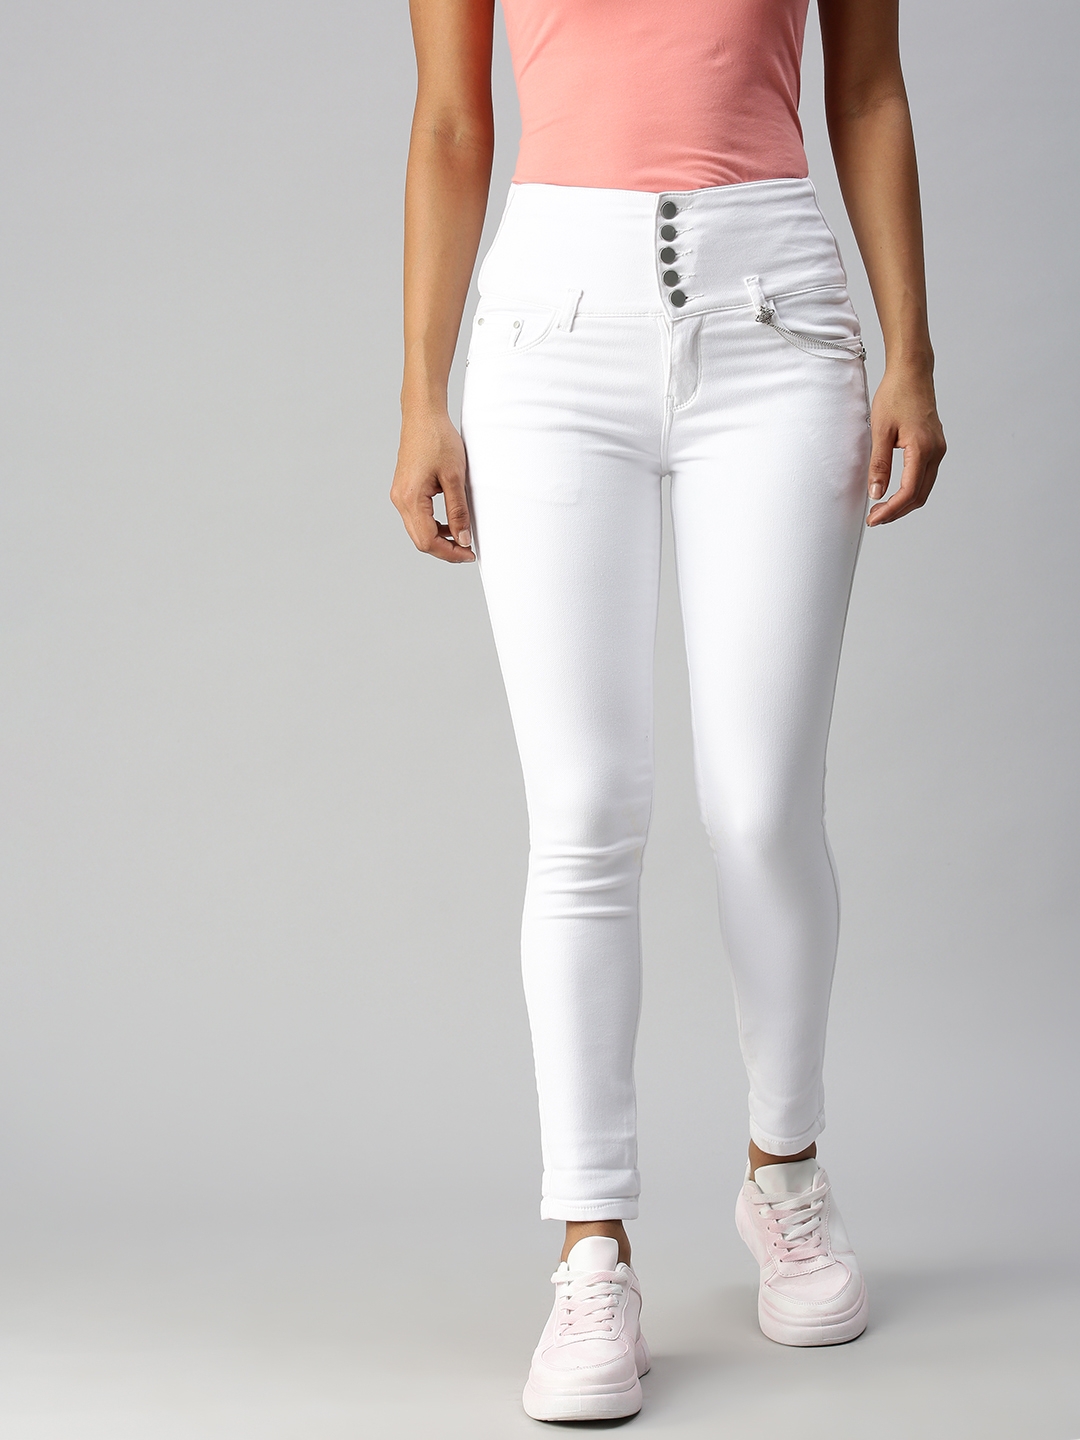 Showoff Women's Skinny Fit Clean Look White Jeans